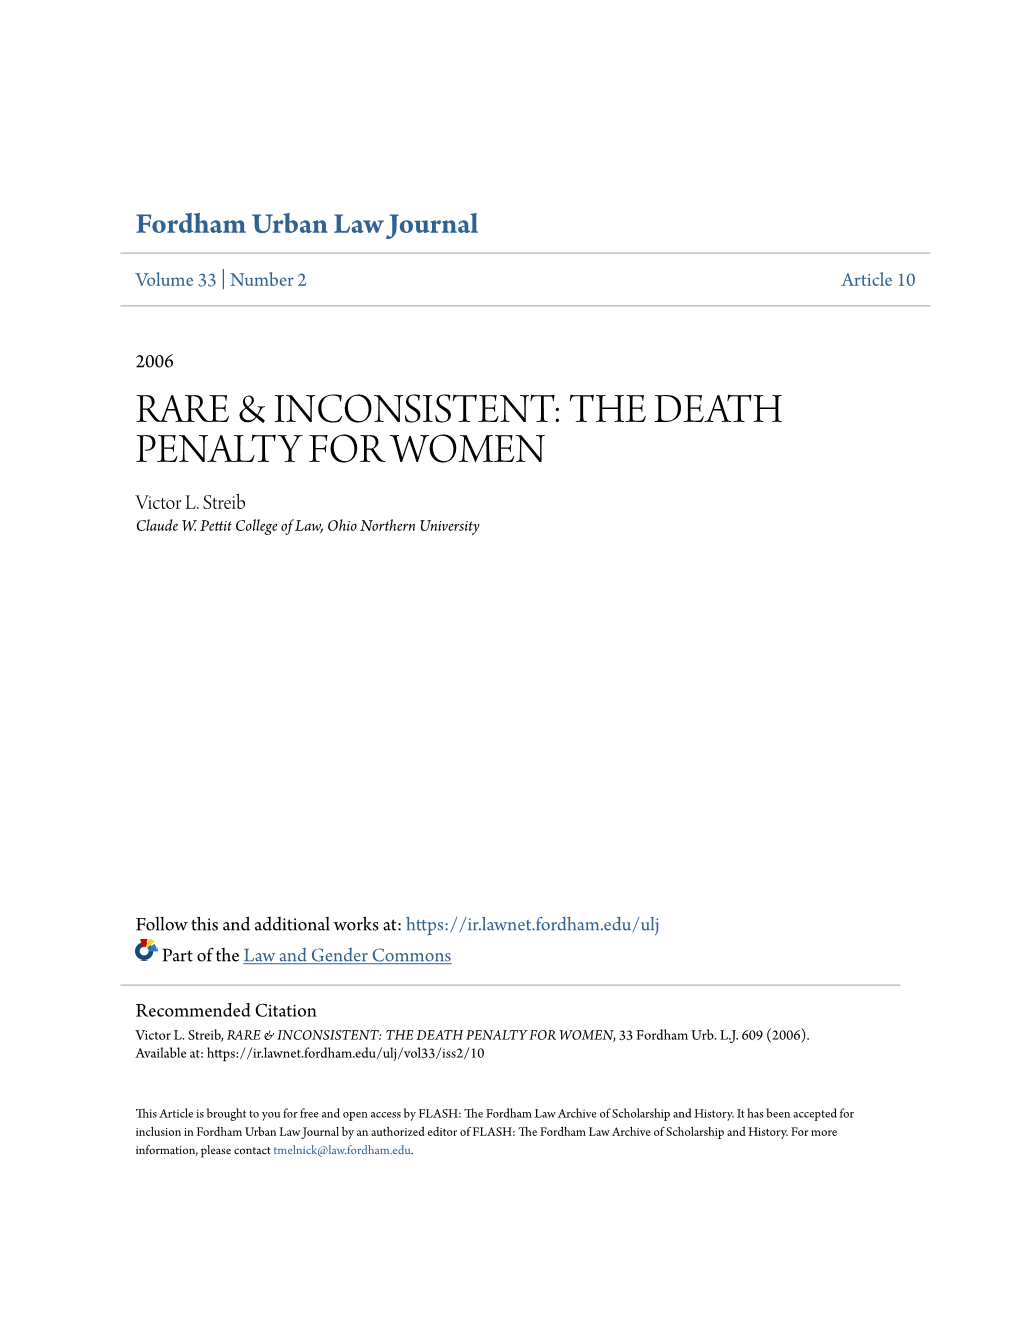 Rare & Inconsistent: the Death Penalty for Women